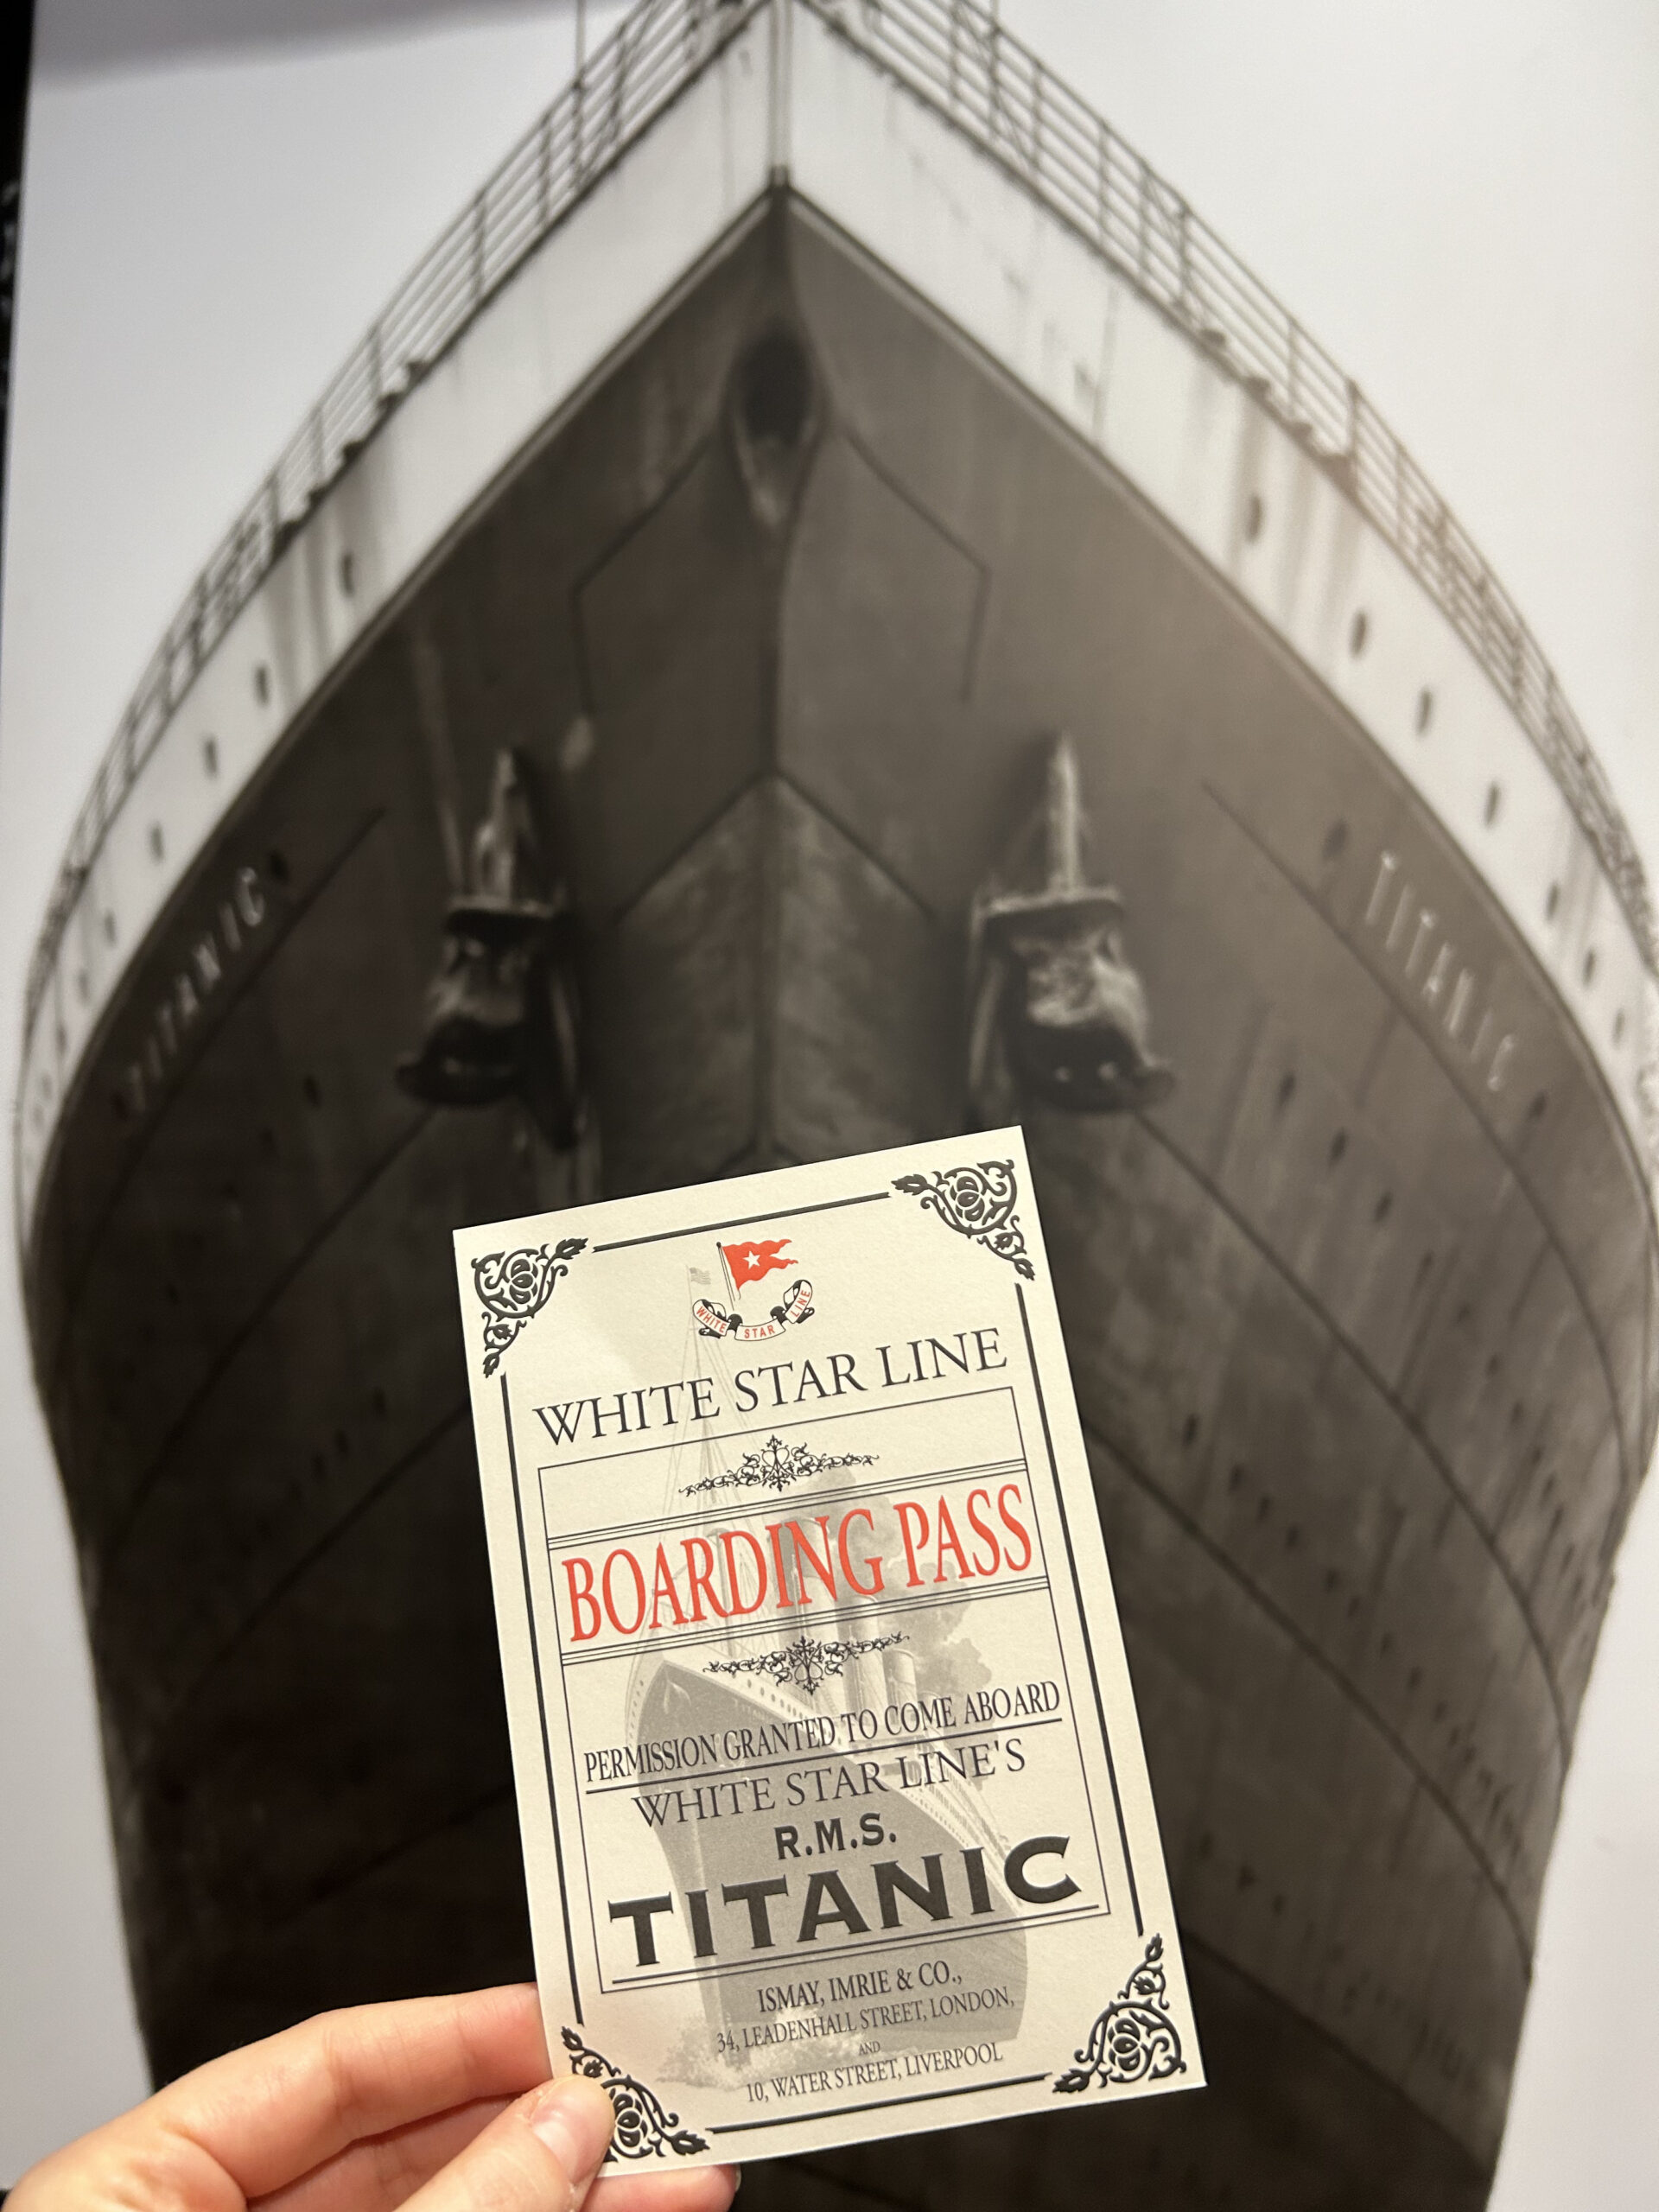 A photo of someone holding up a replica White Star Line boarding pass in front of a black and white photo of the Titanic ship.